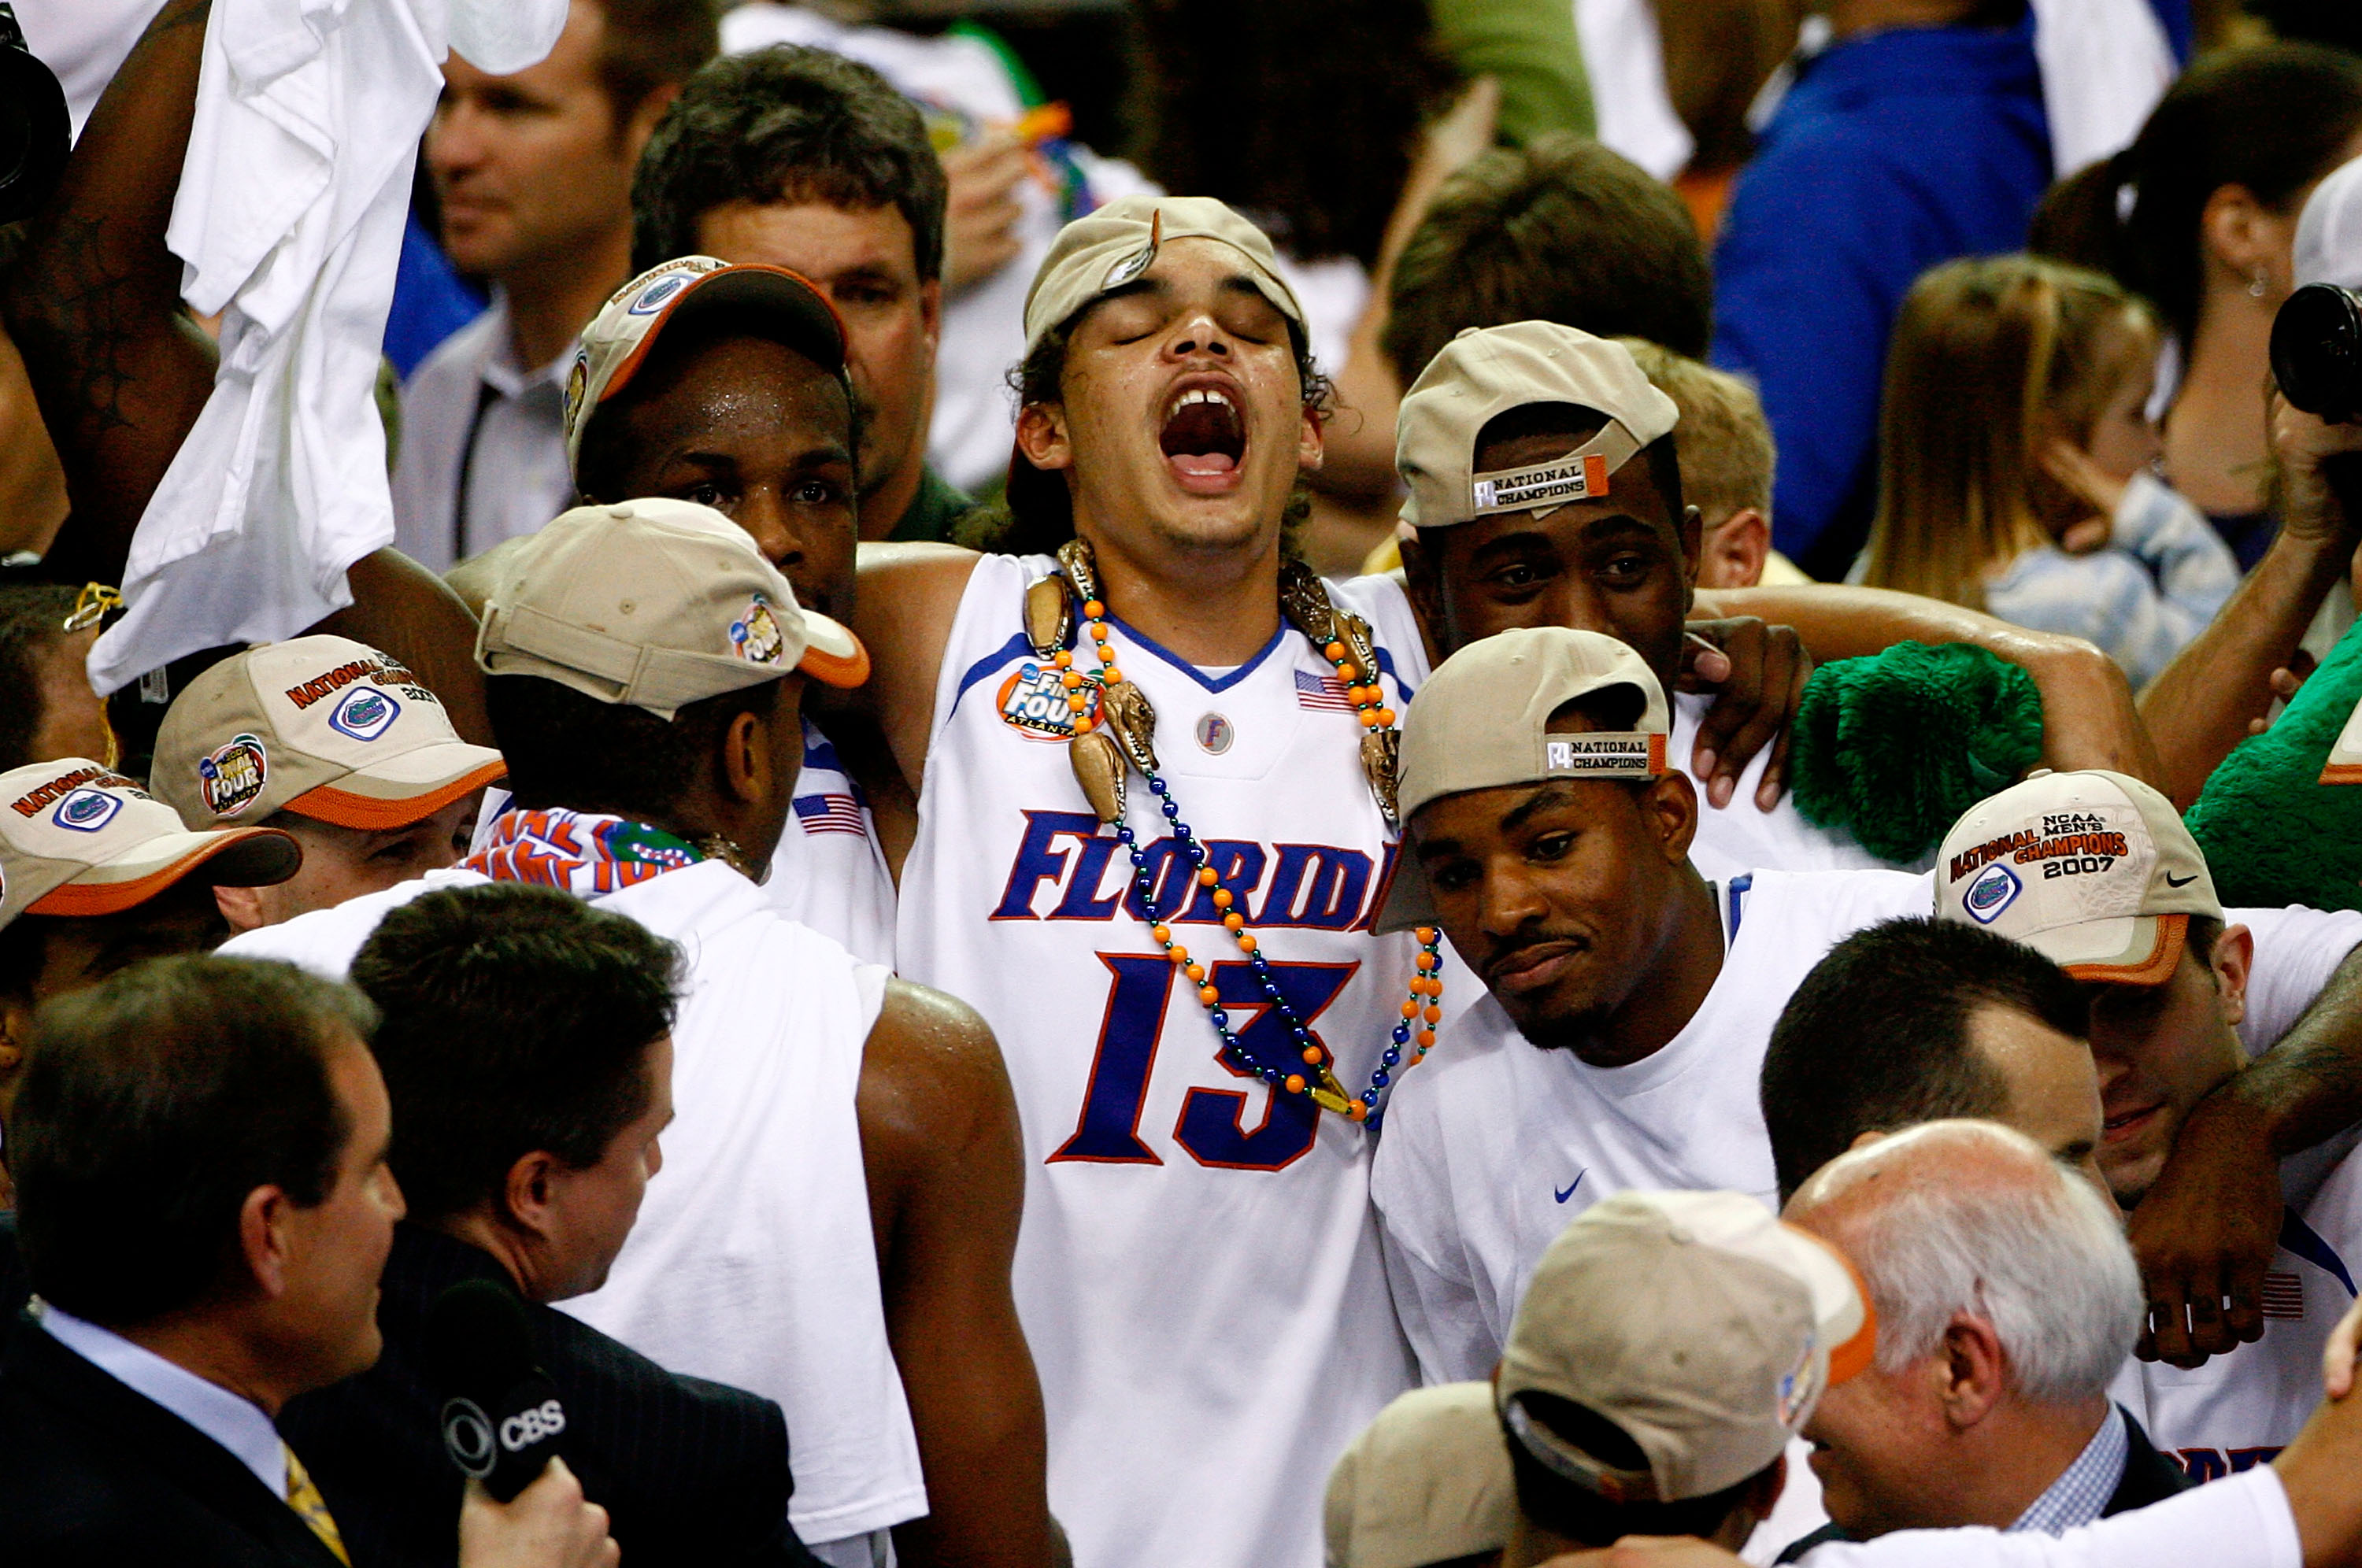 ATLANTA - APRIL 02: Joakim Noah and his Florida Gators celebrate after defeating the Ohio State Buckeyes during the NCAA Men's Basketball Championship game at the Georgia Dome on April 2, 2007 in Atlanta, Georgia. (Photo by Win McNamee/Getty Images)